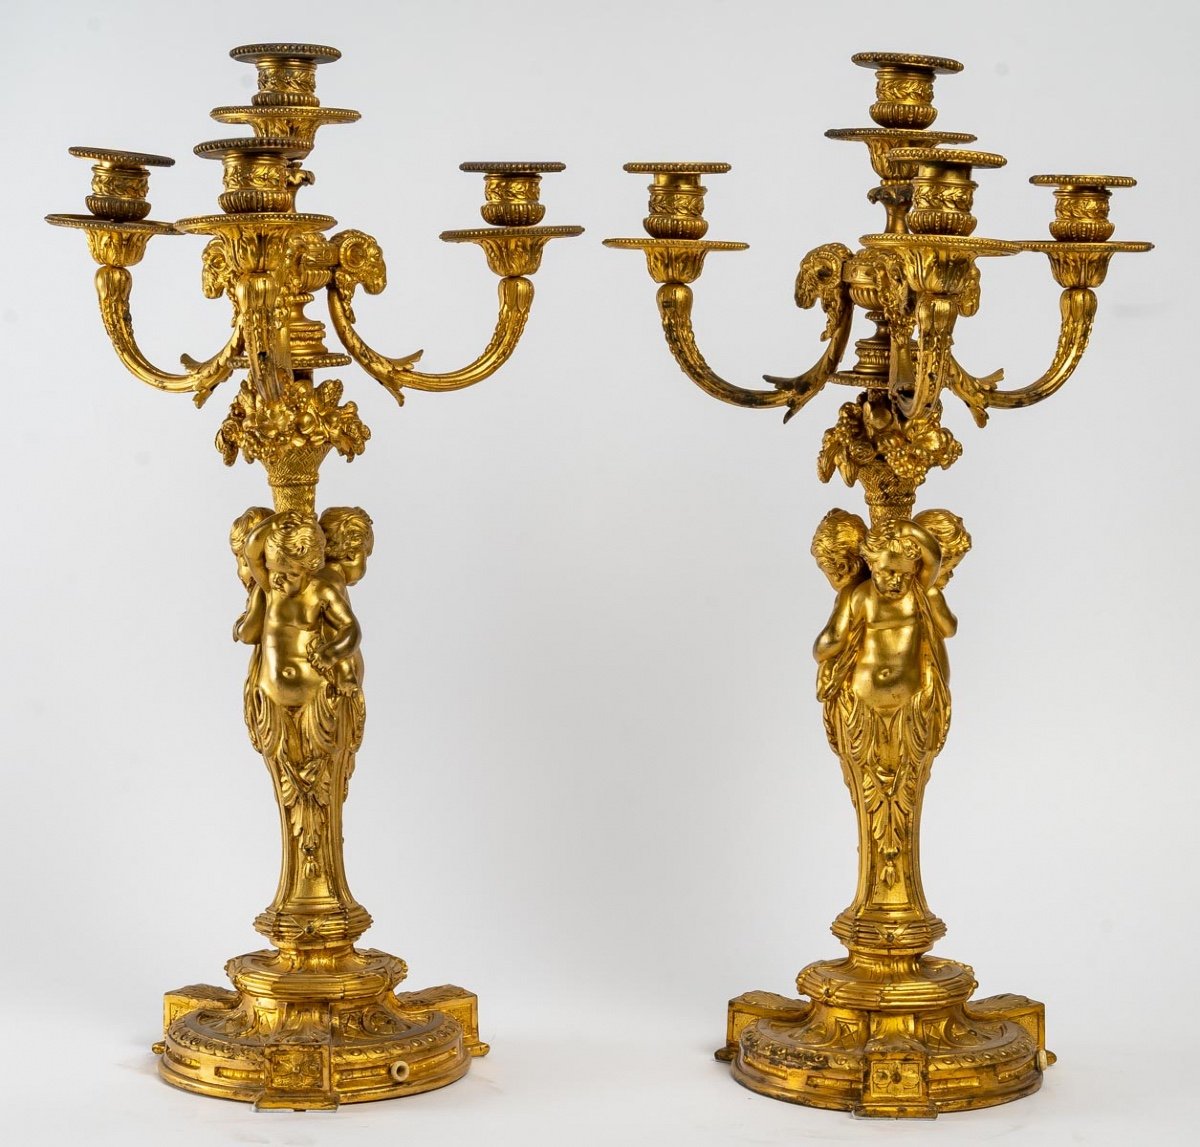 Pair Of Candelabras In Gilt Bronze Late Nineteenth Century